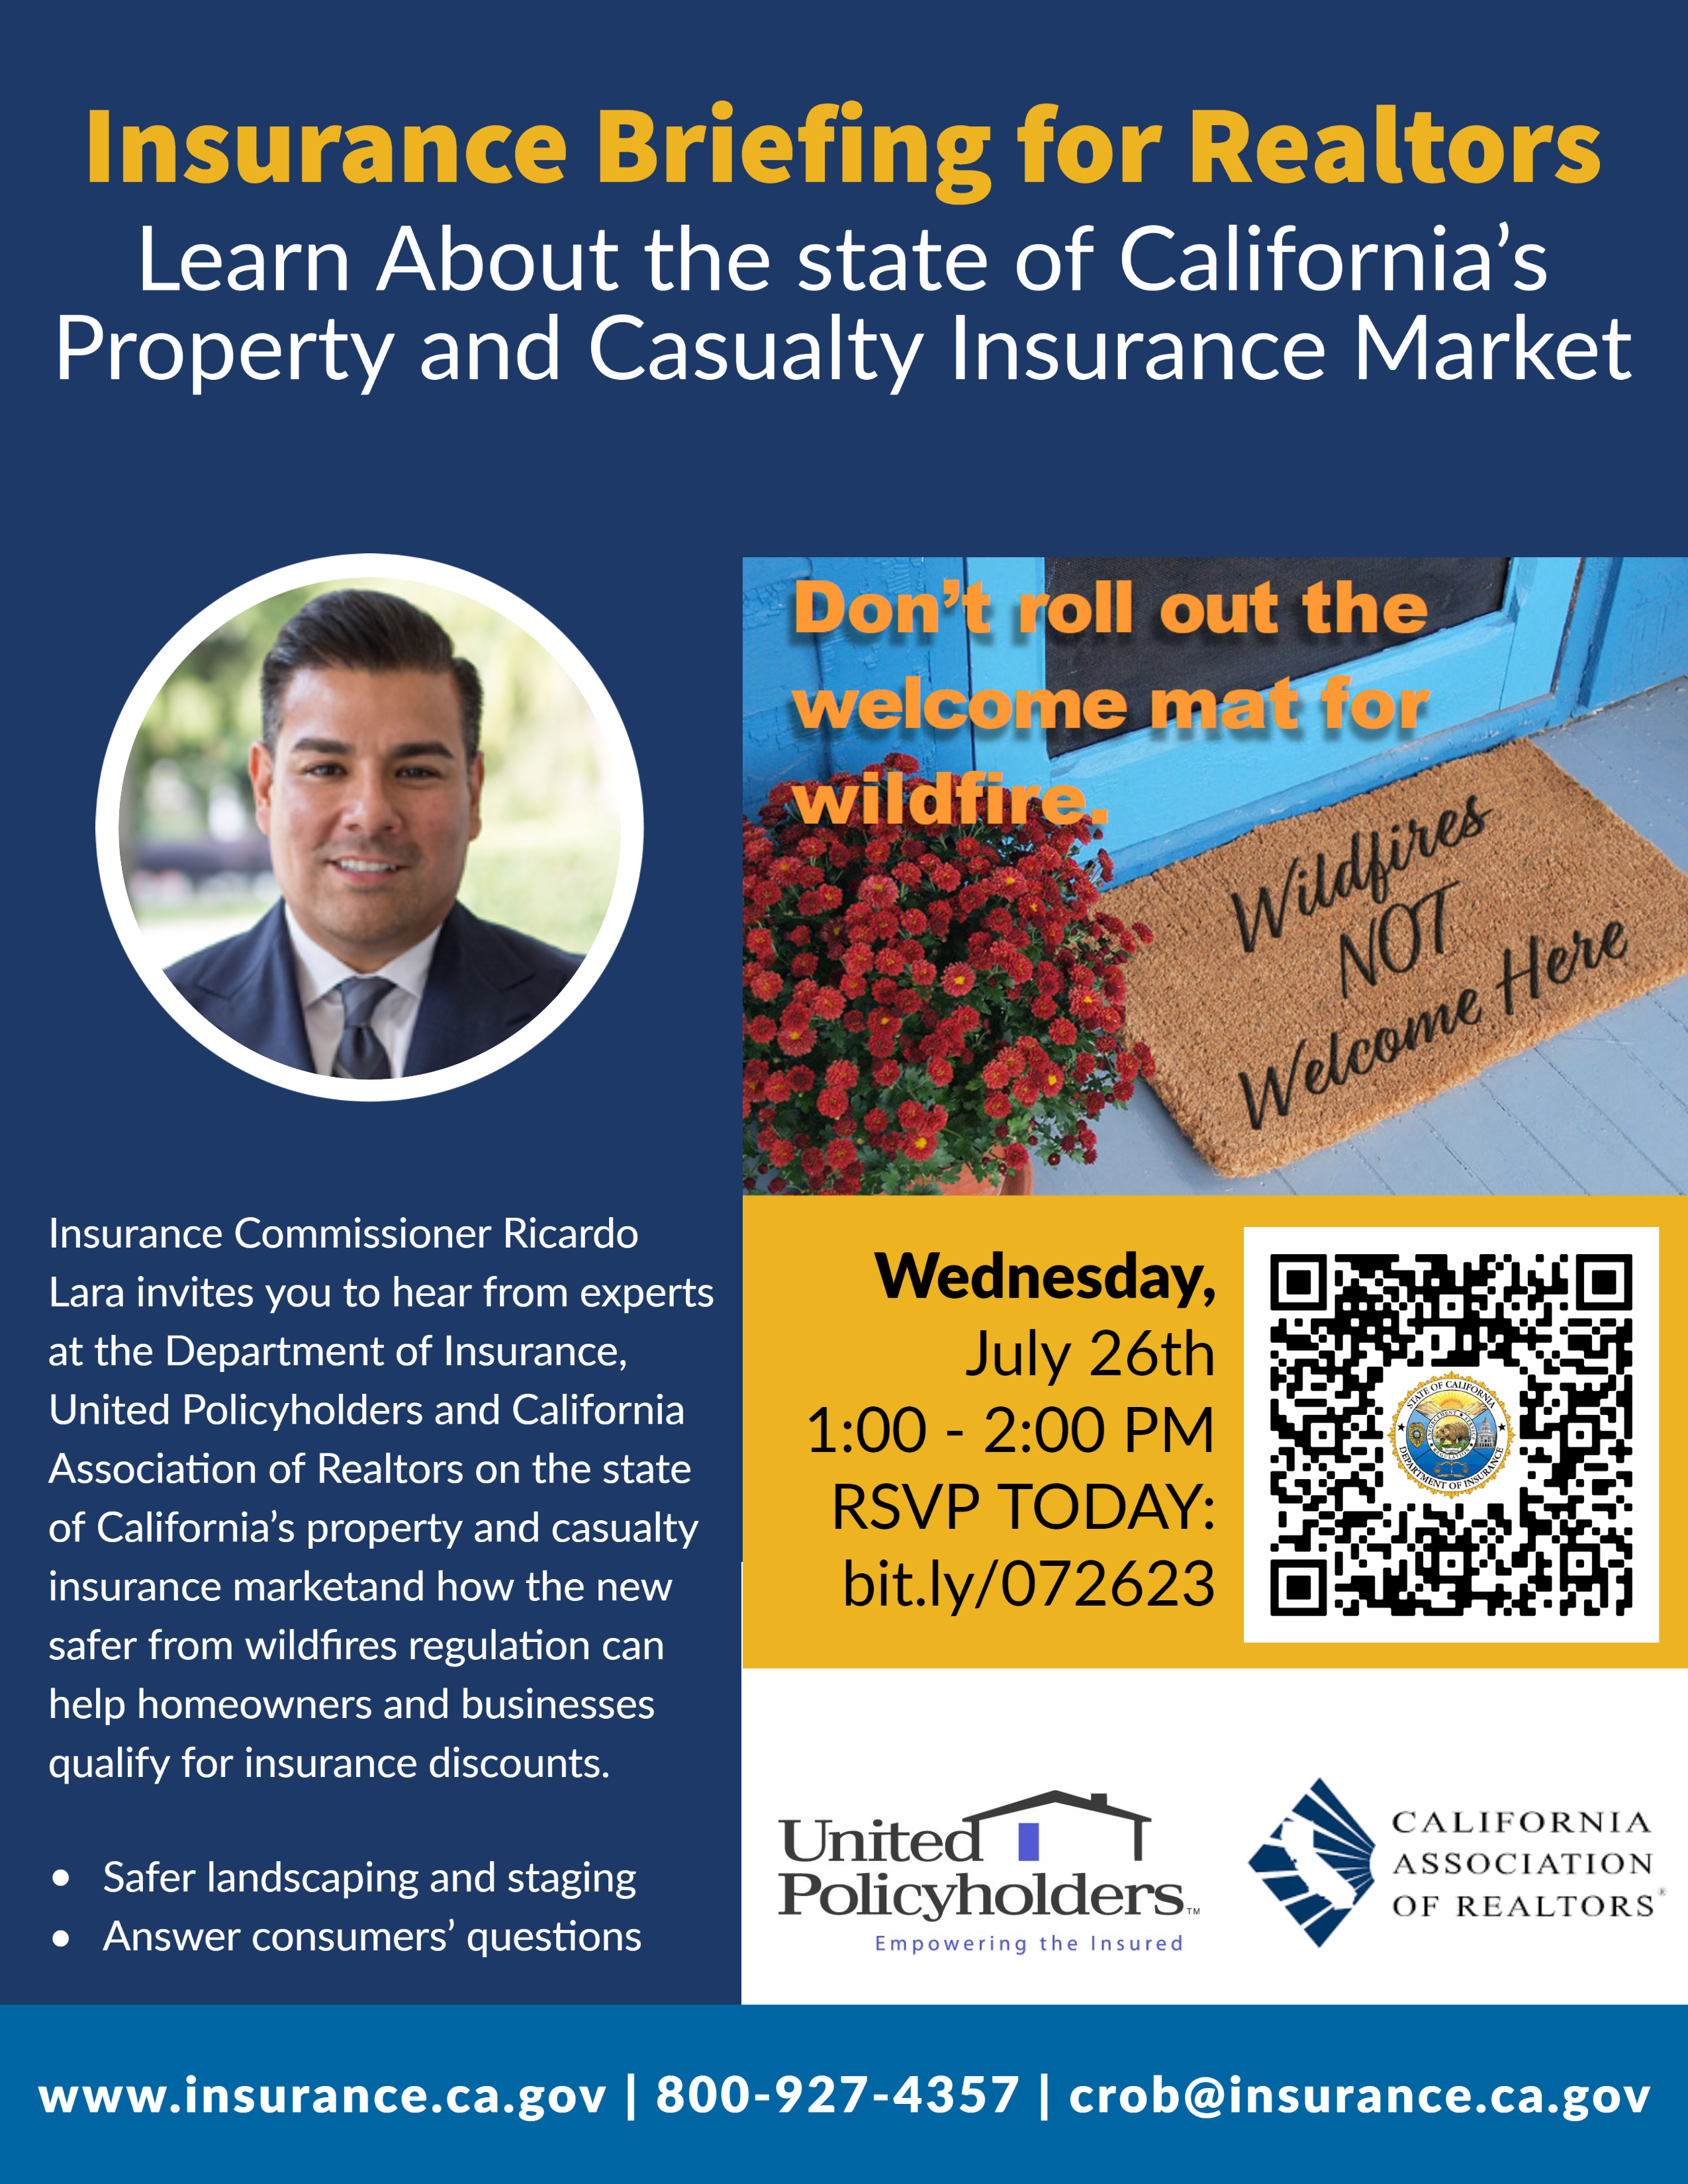 Hear from experts at the Department of Insurance, United Policyholders and California Association of Realtors on the state of California’s property and casualty insurance market.